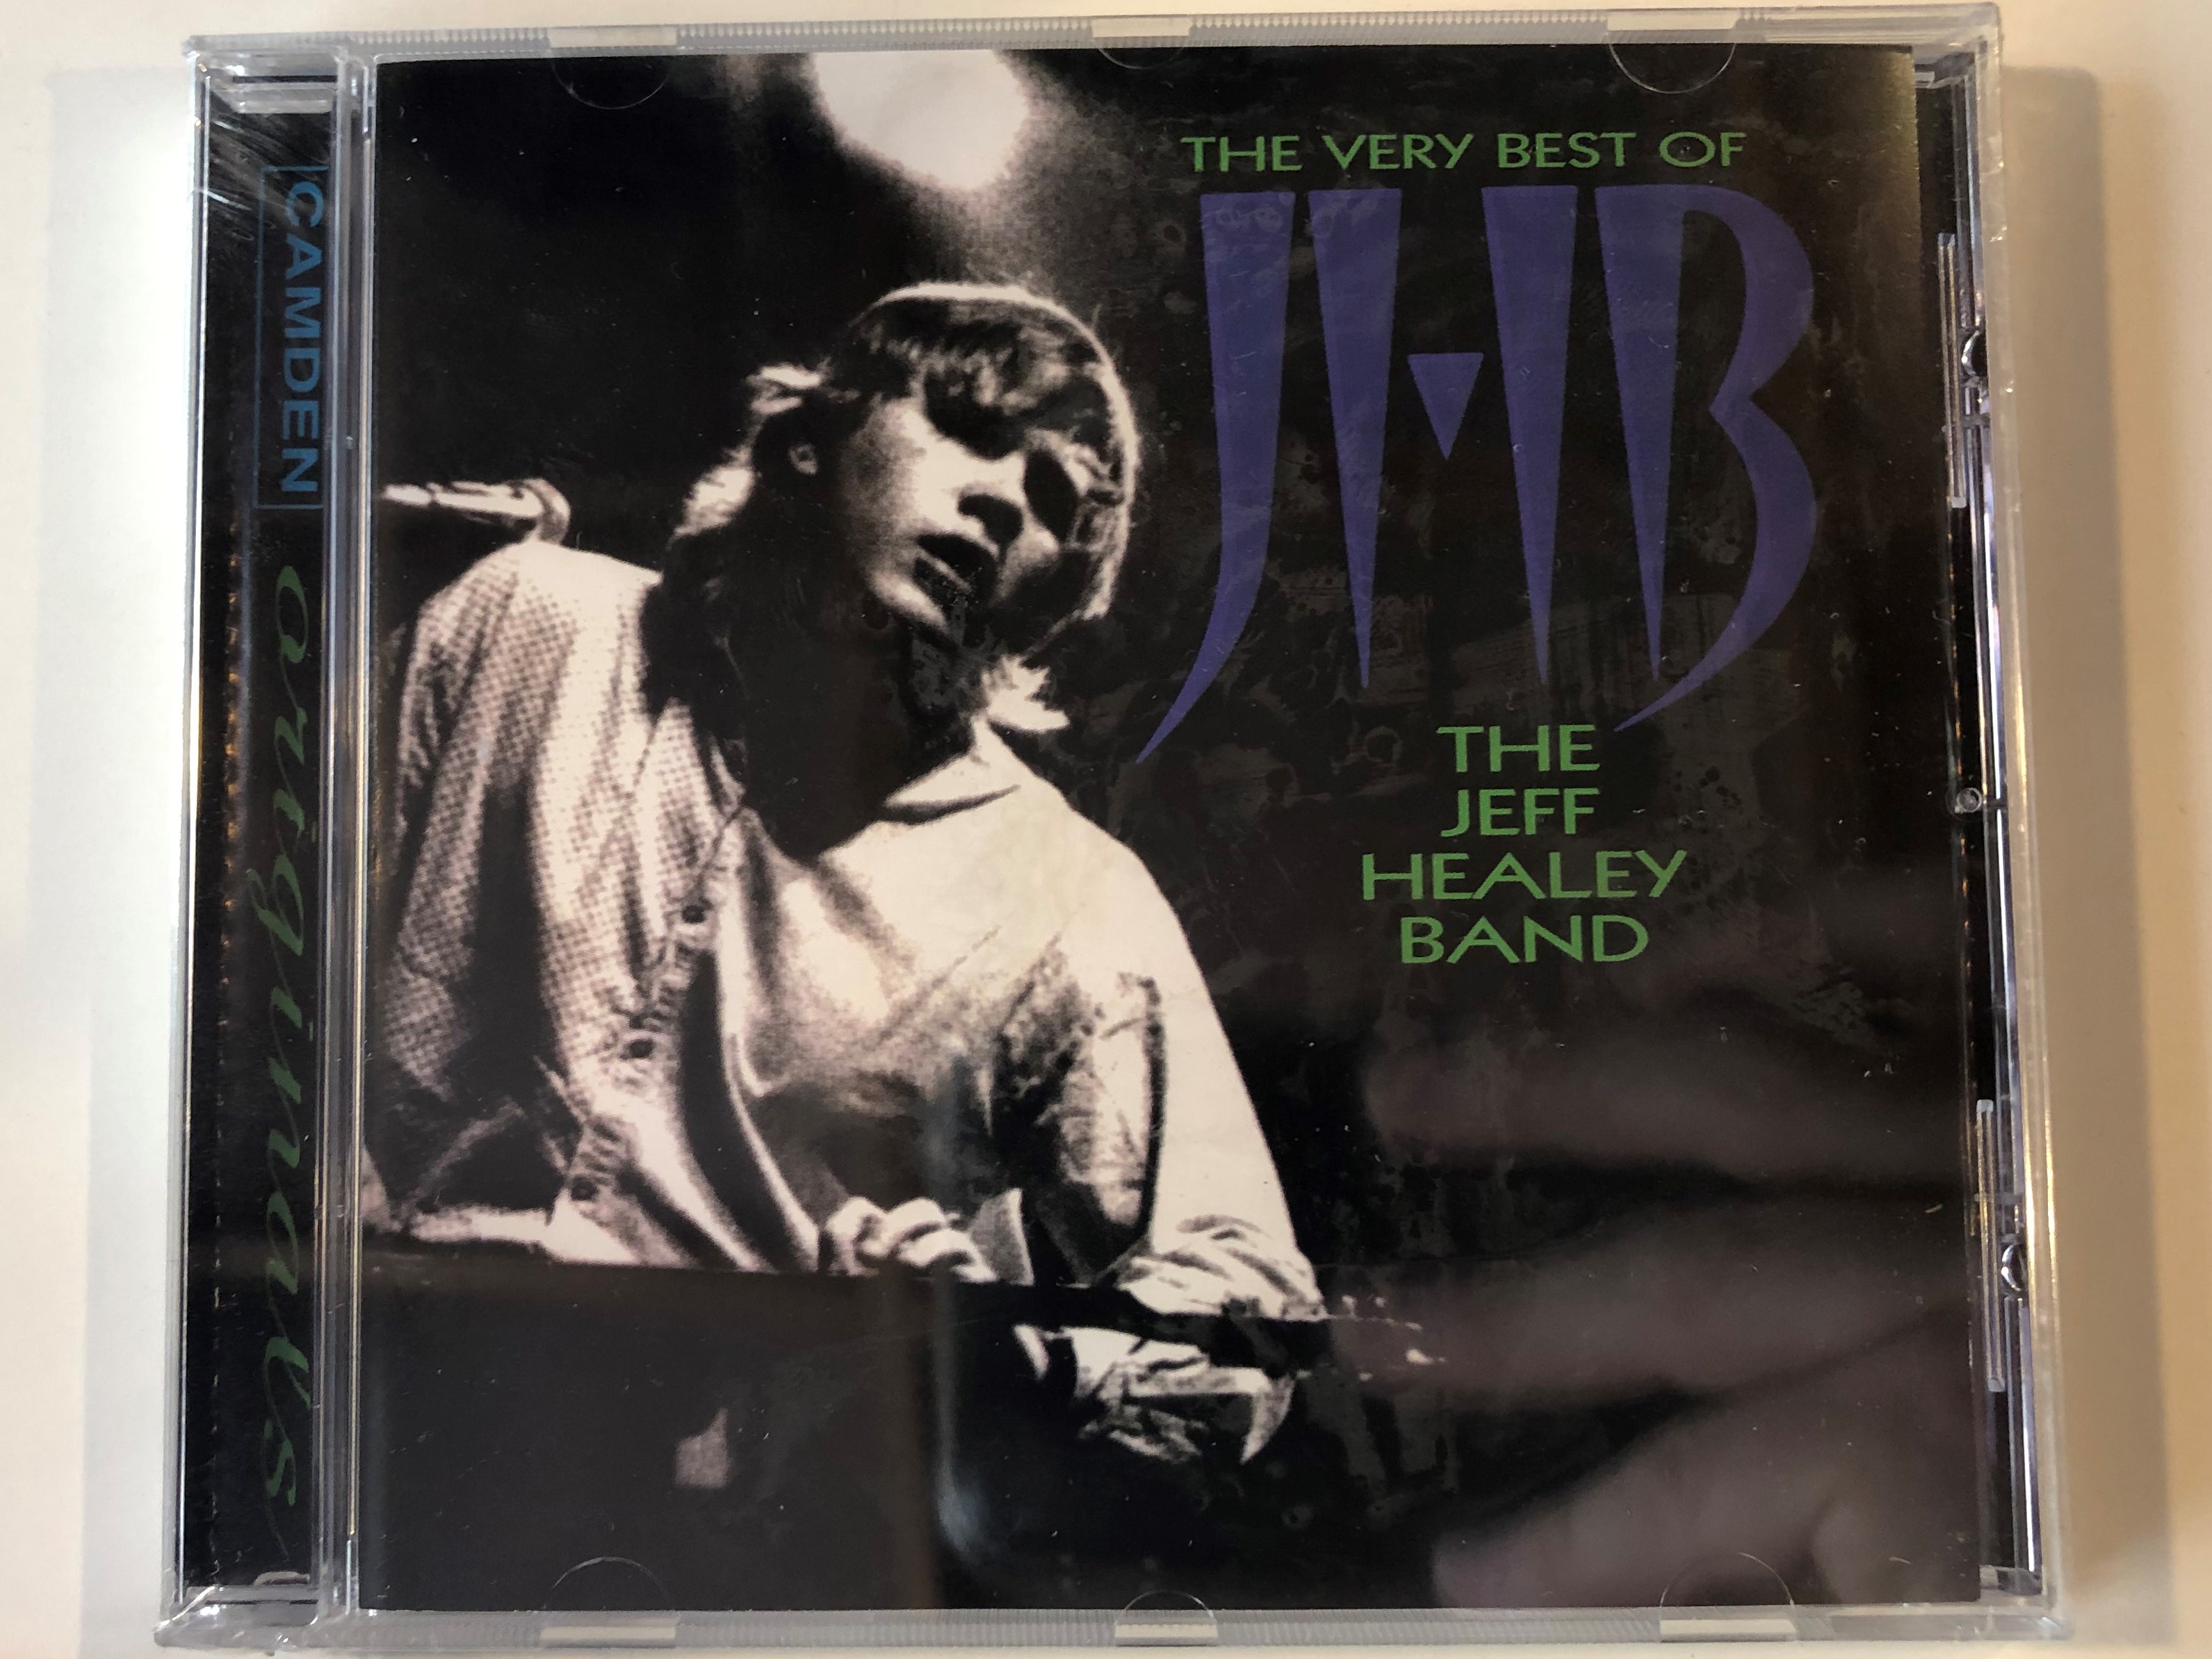 the-very-best-of-the-jeff-healey-band-bmg-audio-cd-1998-74321-603382-1-.jpg